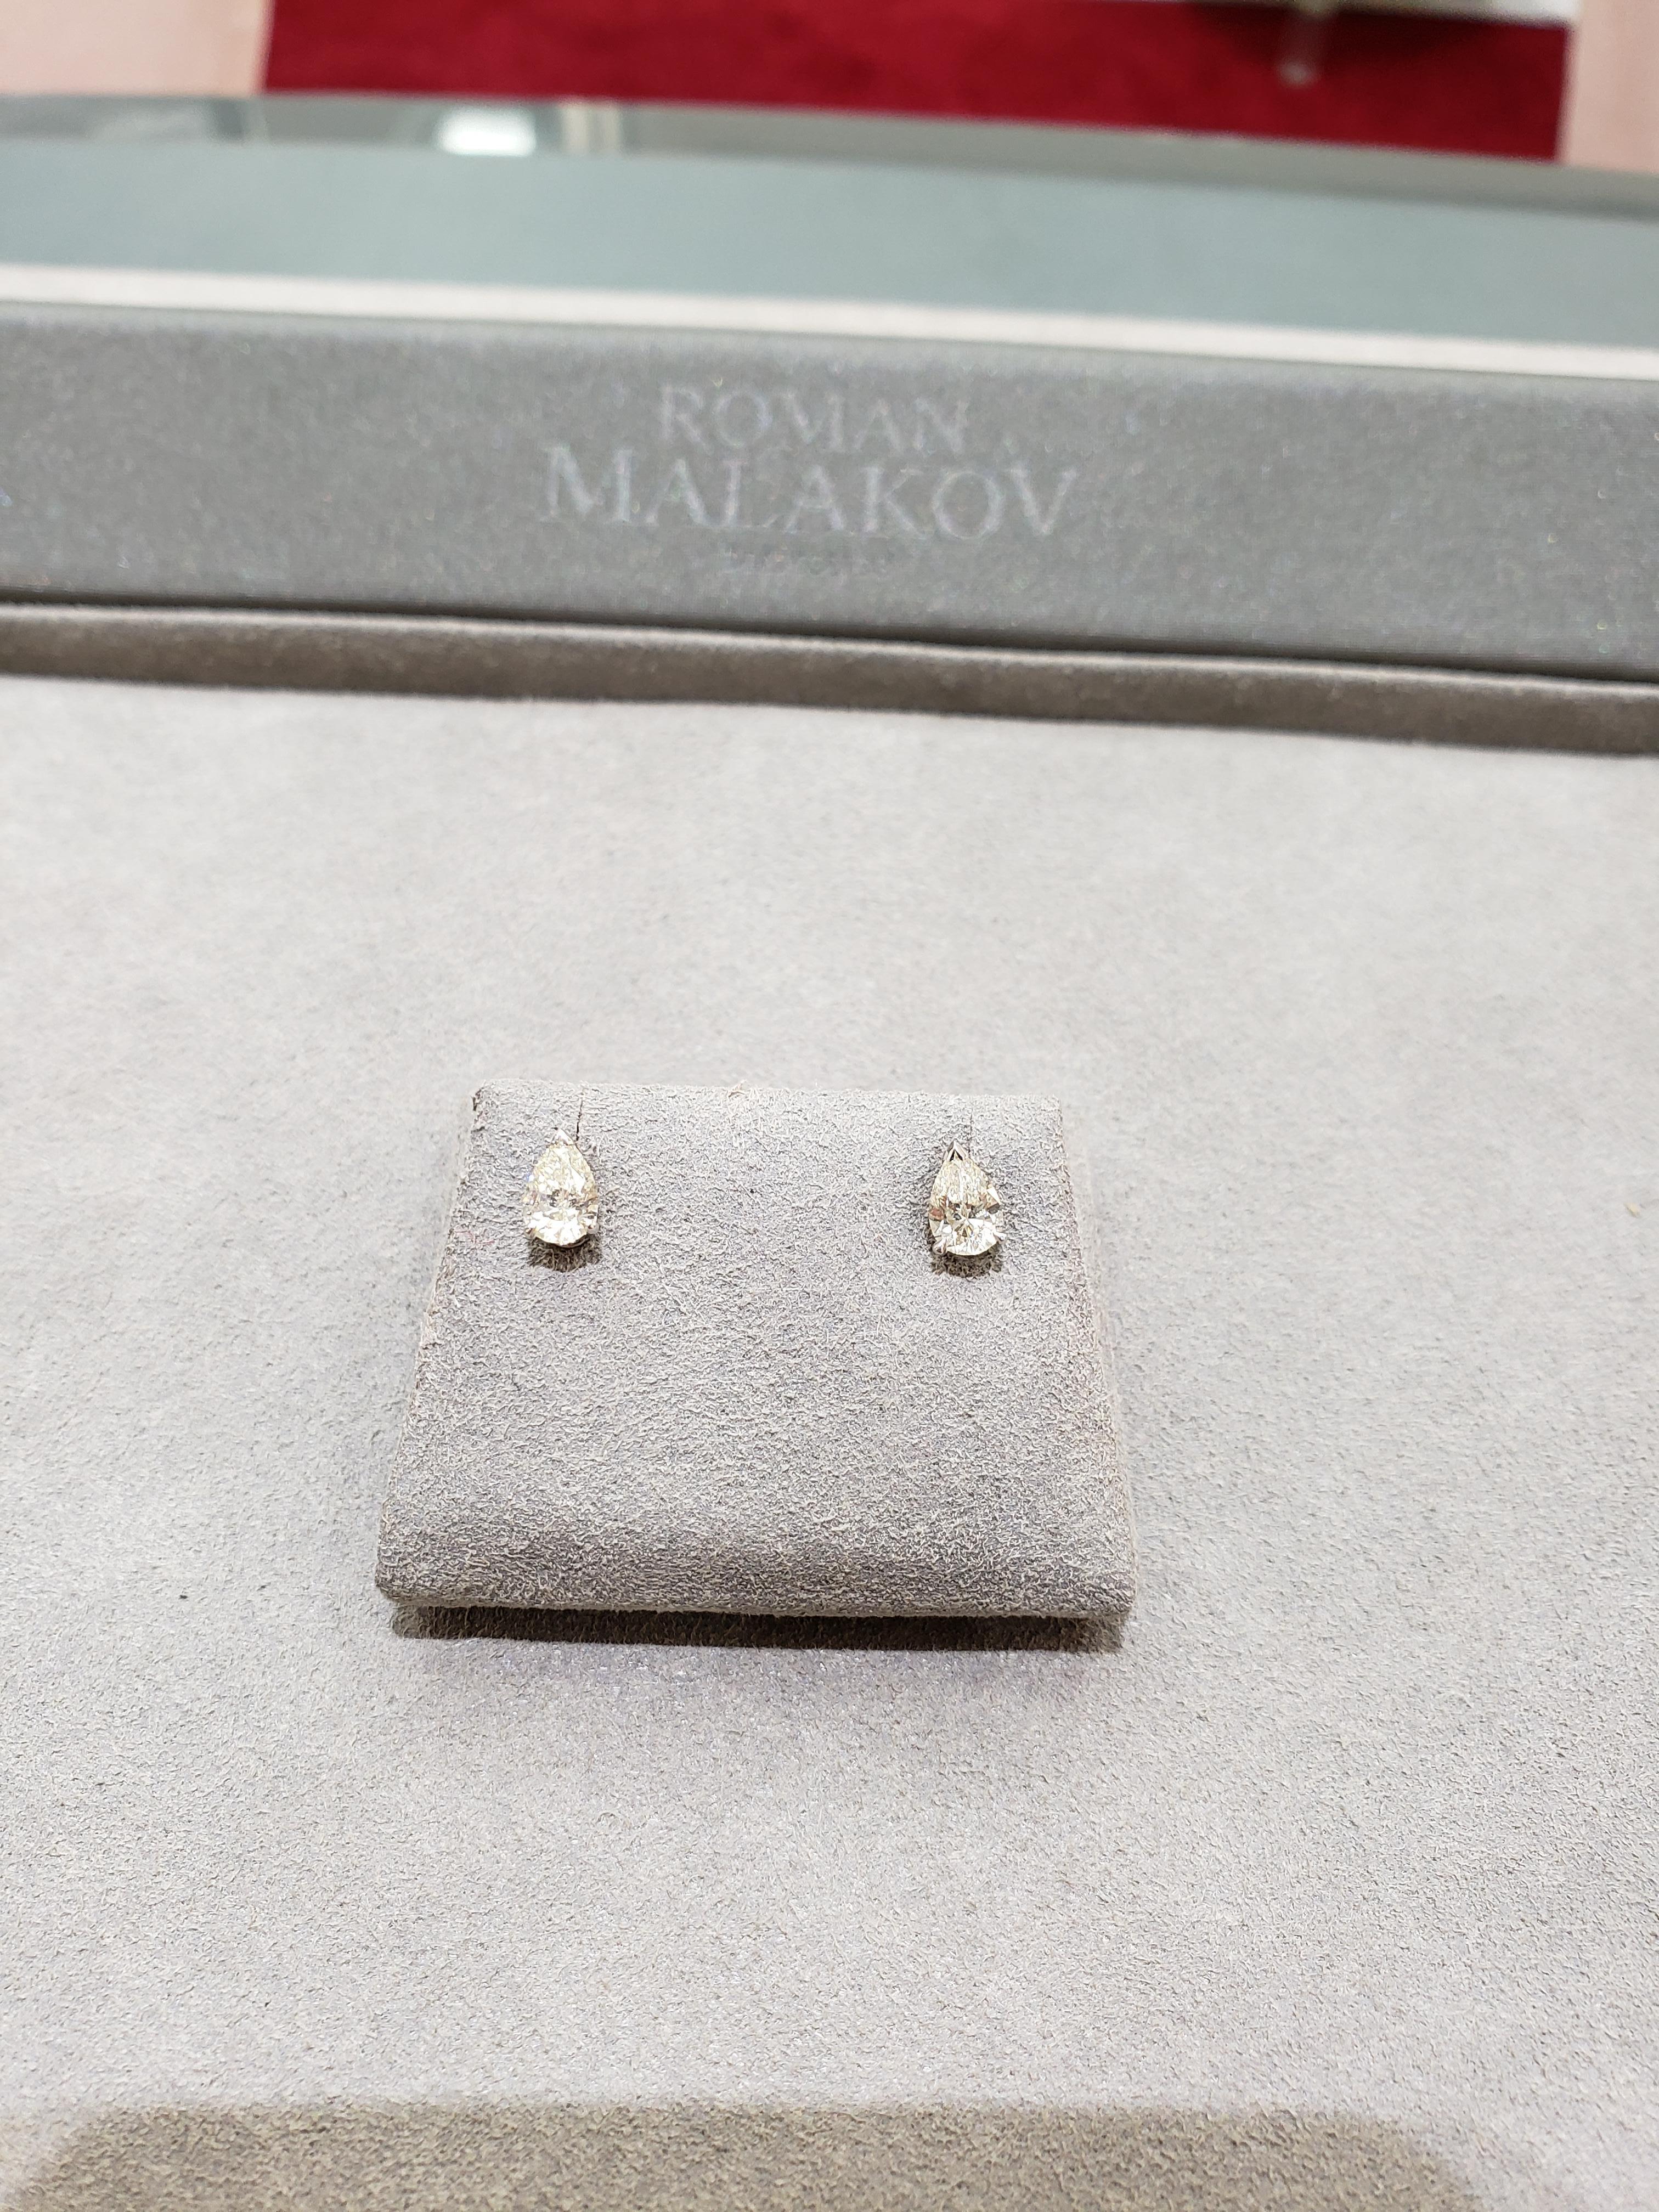 Simple but elegant stud earrings set with two pear shape diamonds weighing 1.03 carats total. Made in 14K white gold. Perfect for your everyday use. 

Roman Malakov is a custom house, specializing in creating anything you can imagine. If you would